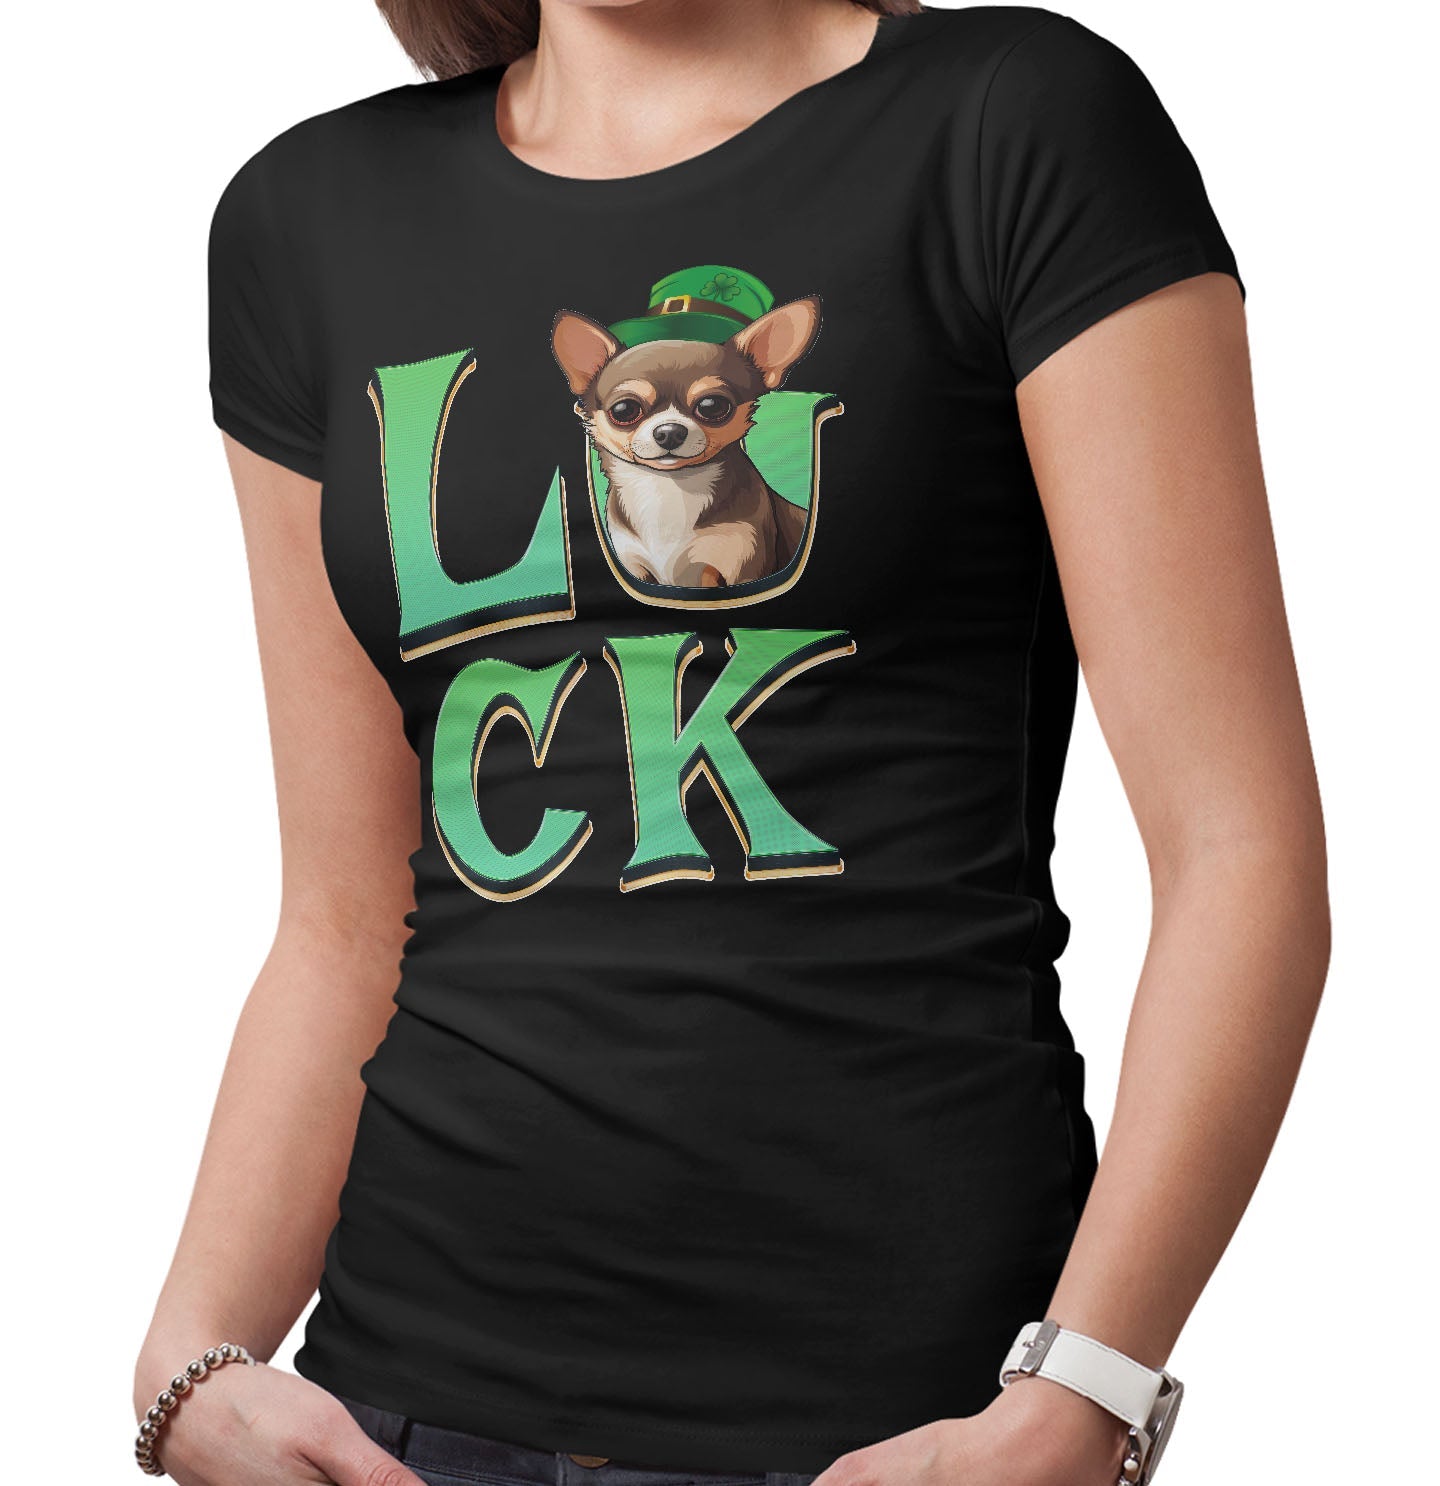 Big LUCK St. Patrick's Day Chihuahua - Women's Fitted T-Shirt